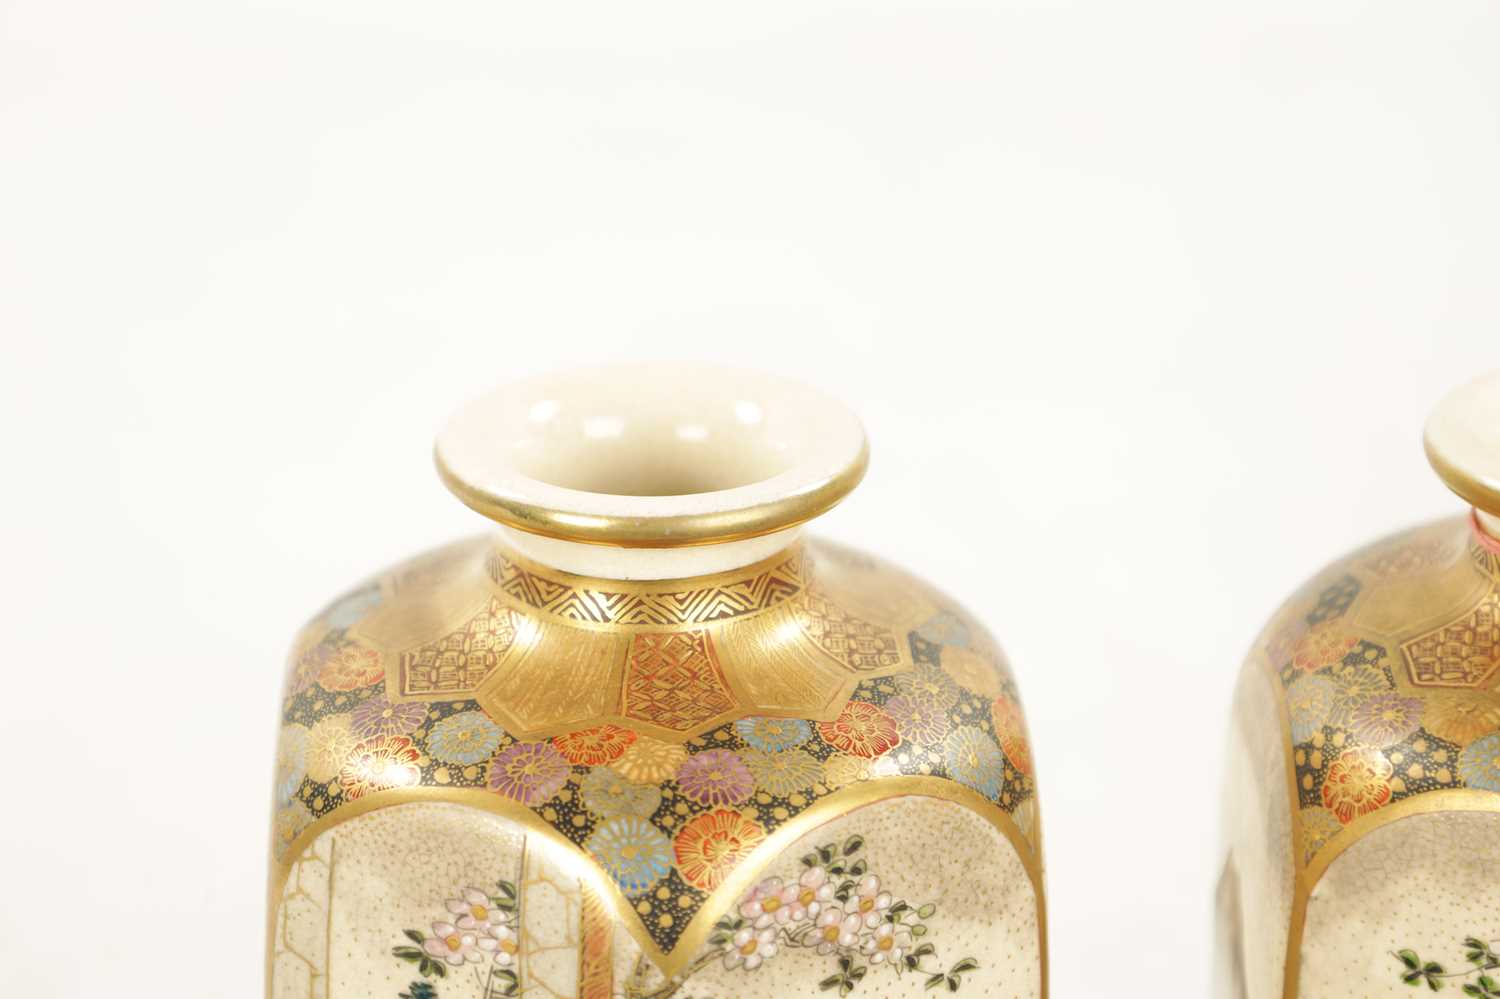 A FINE PAIR OF JAPANESE MEIJI PERIOD SATSUMA CABINET VASES - Image 2 of 8